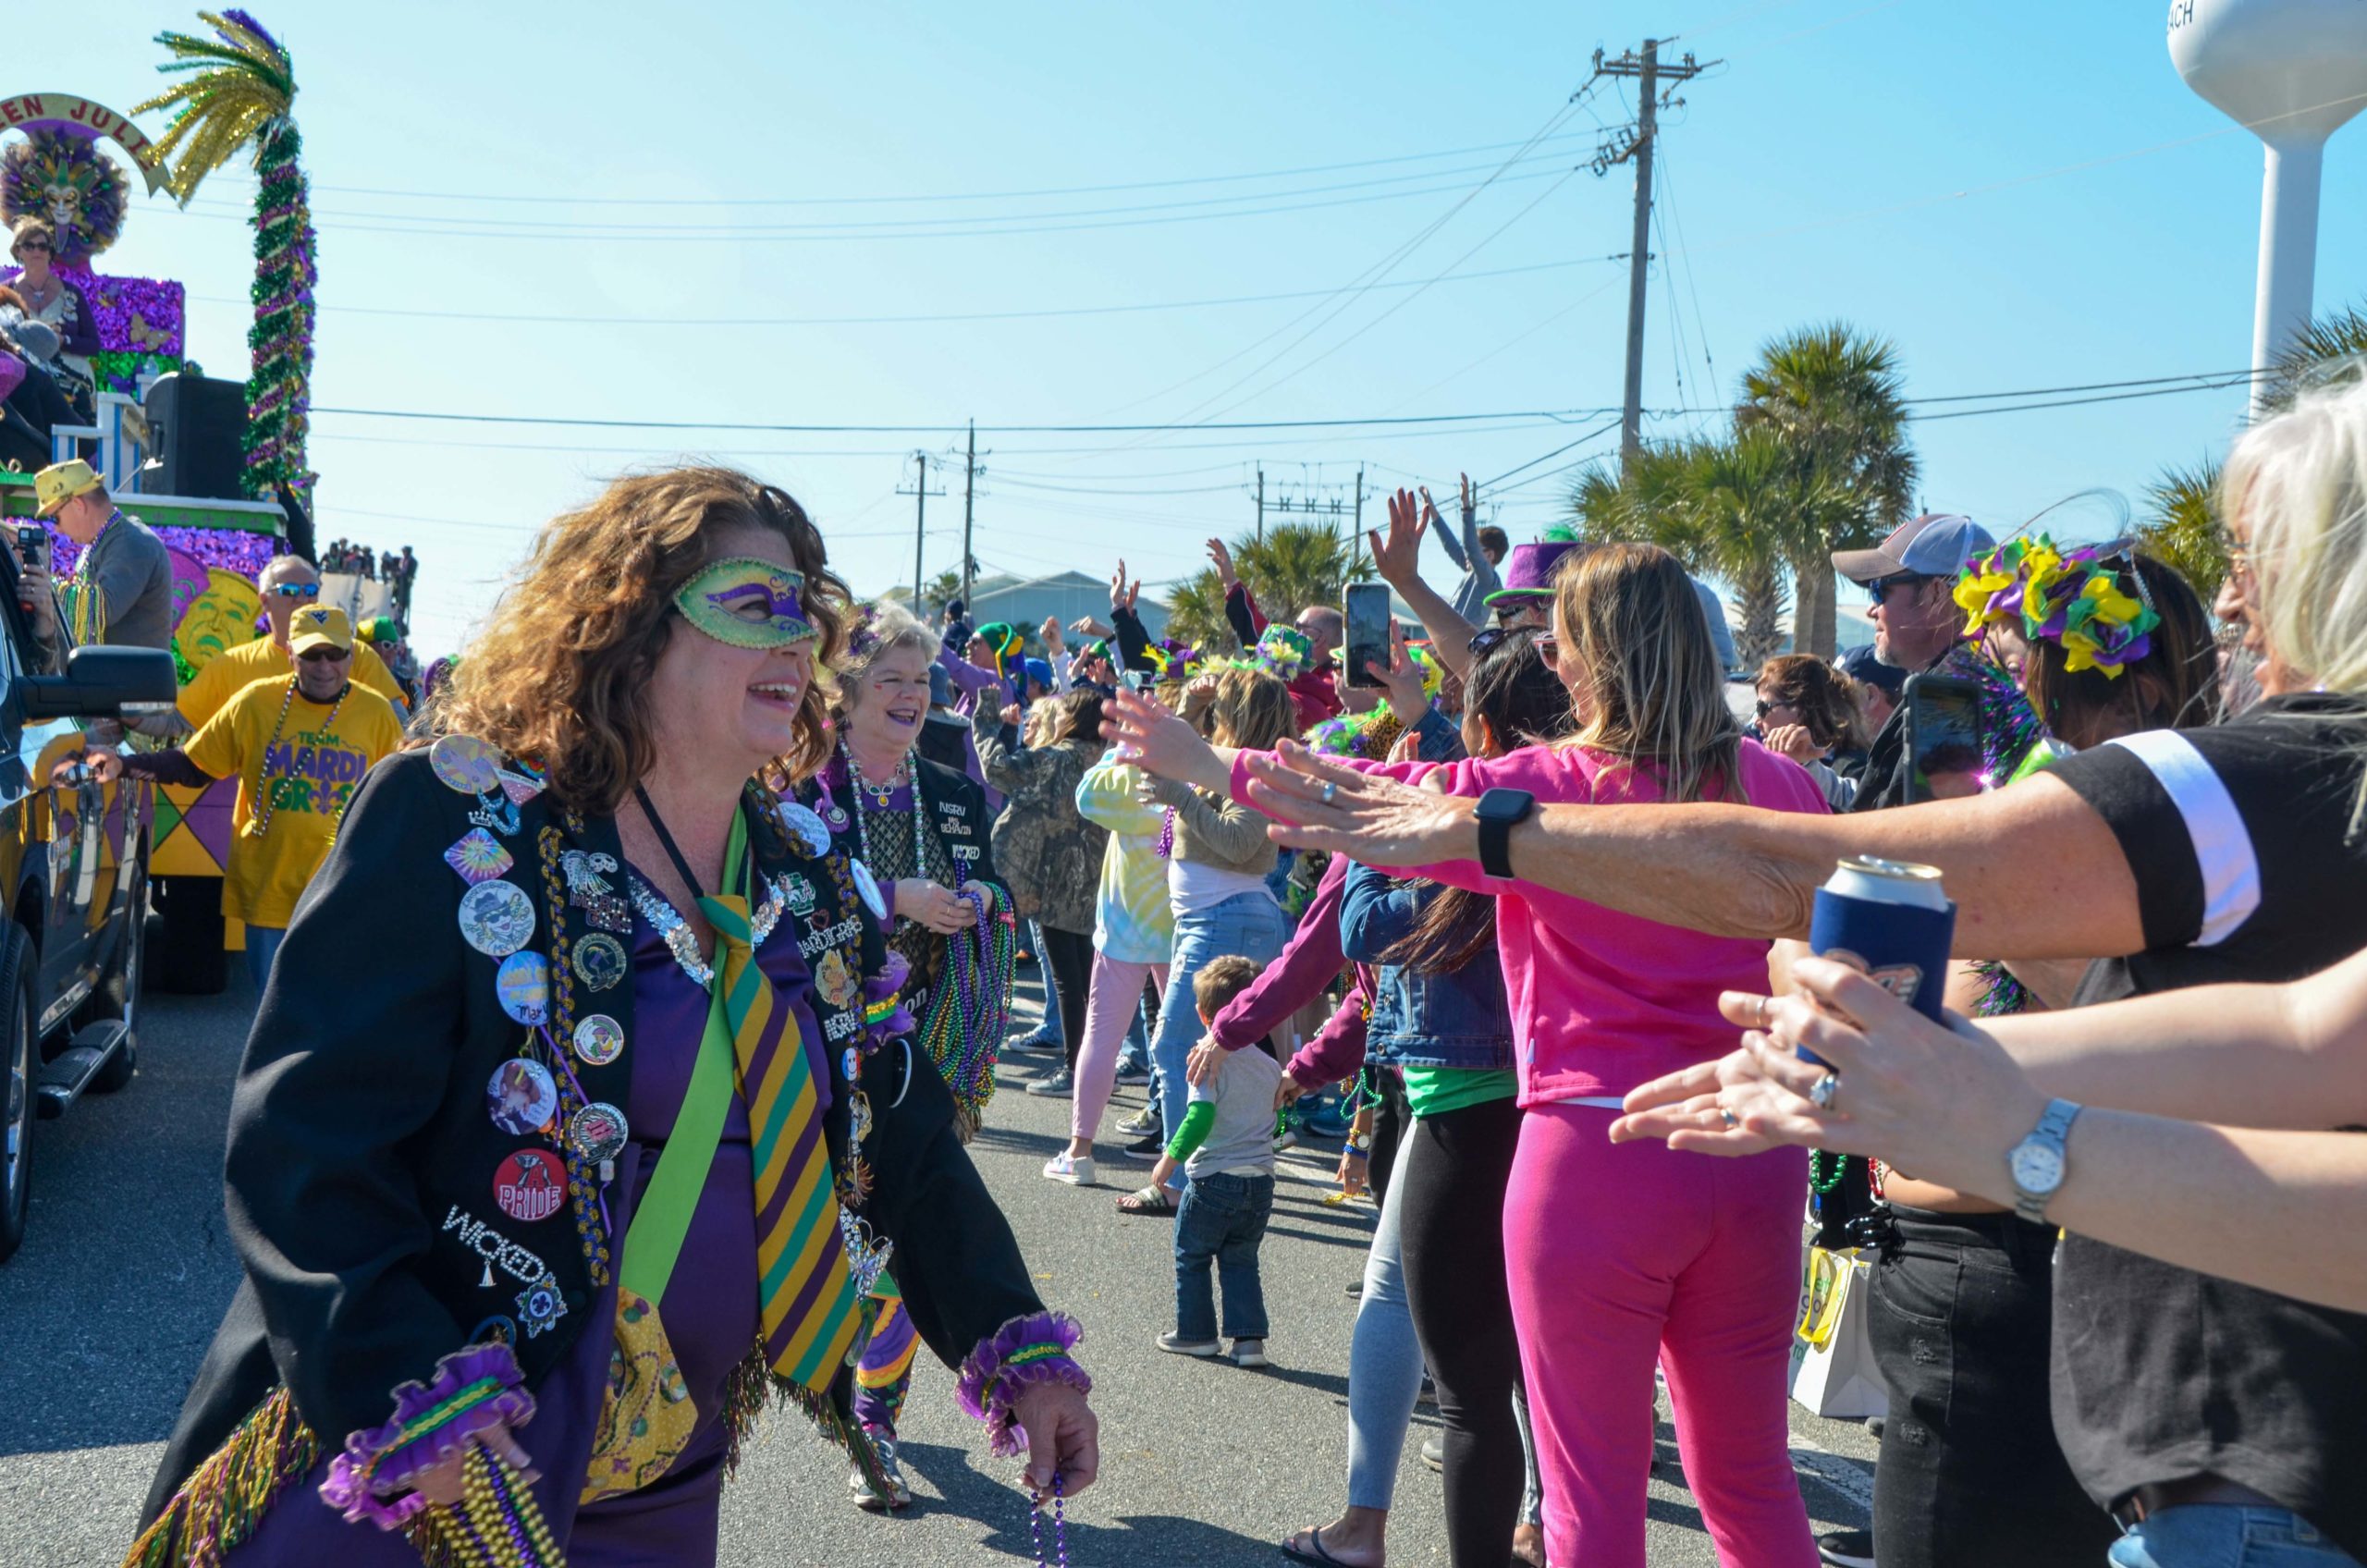 Thousands turn out for 36th annual Mardi Gras parade on Navarre Beach